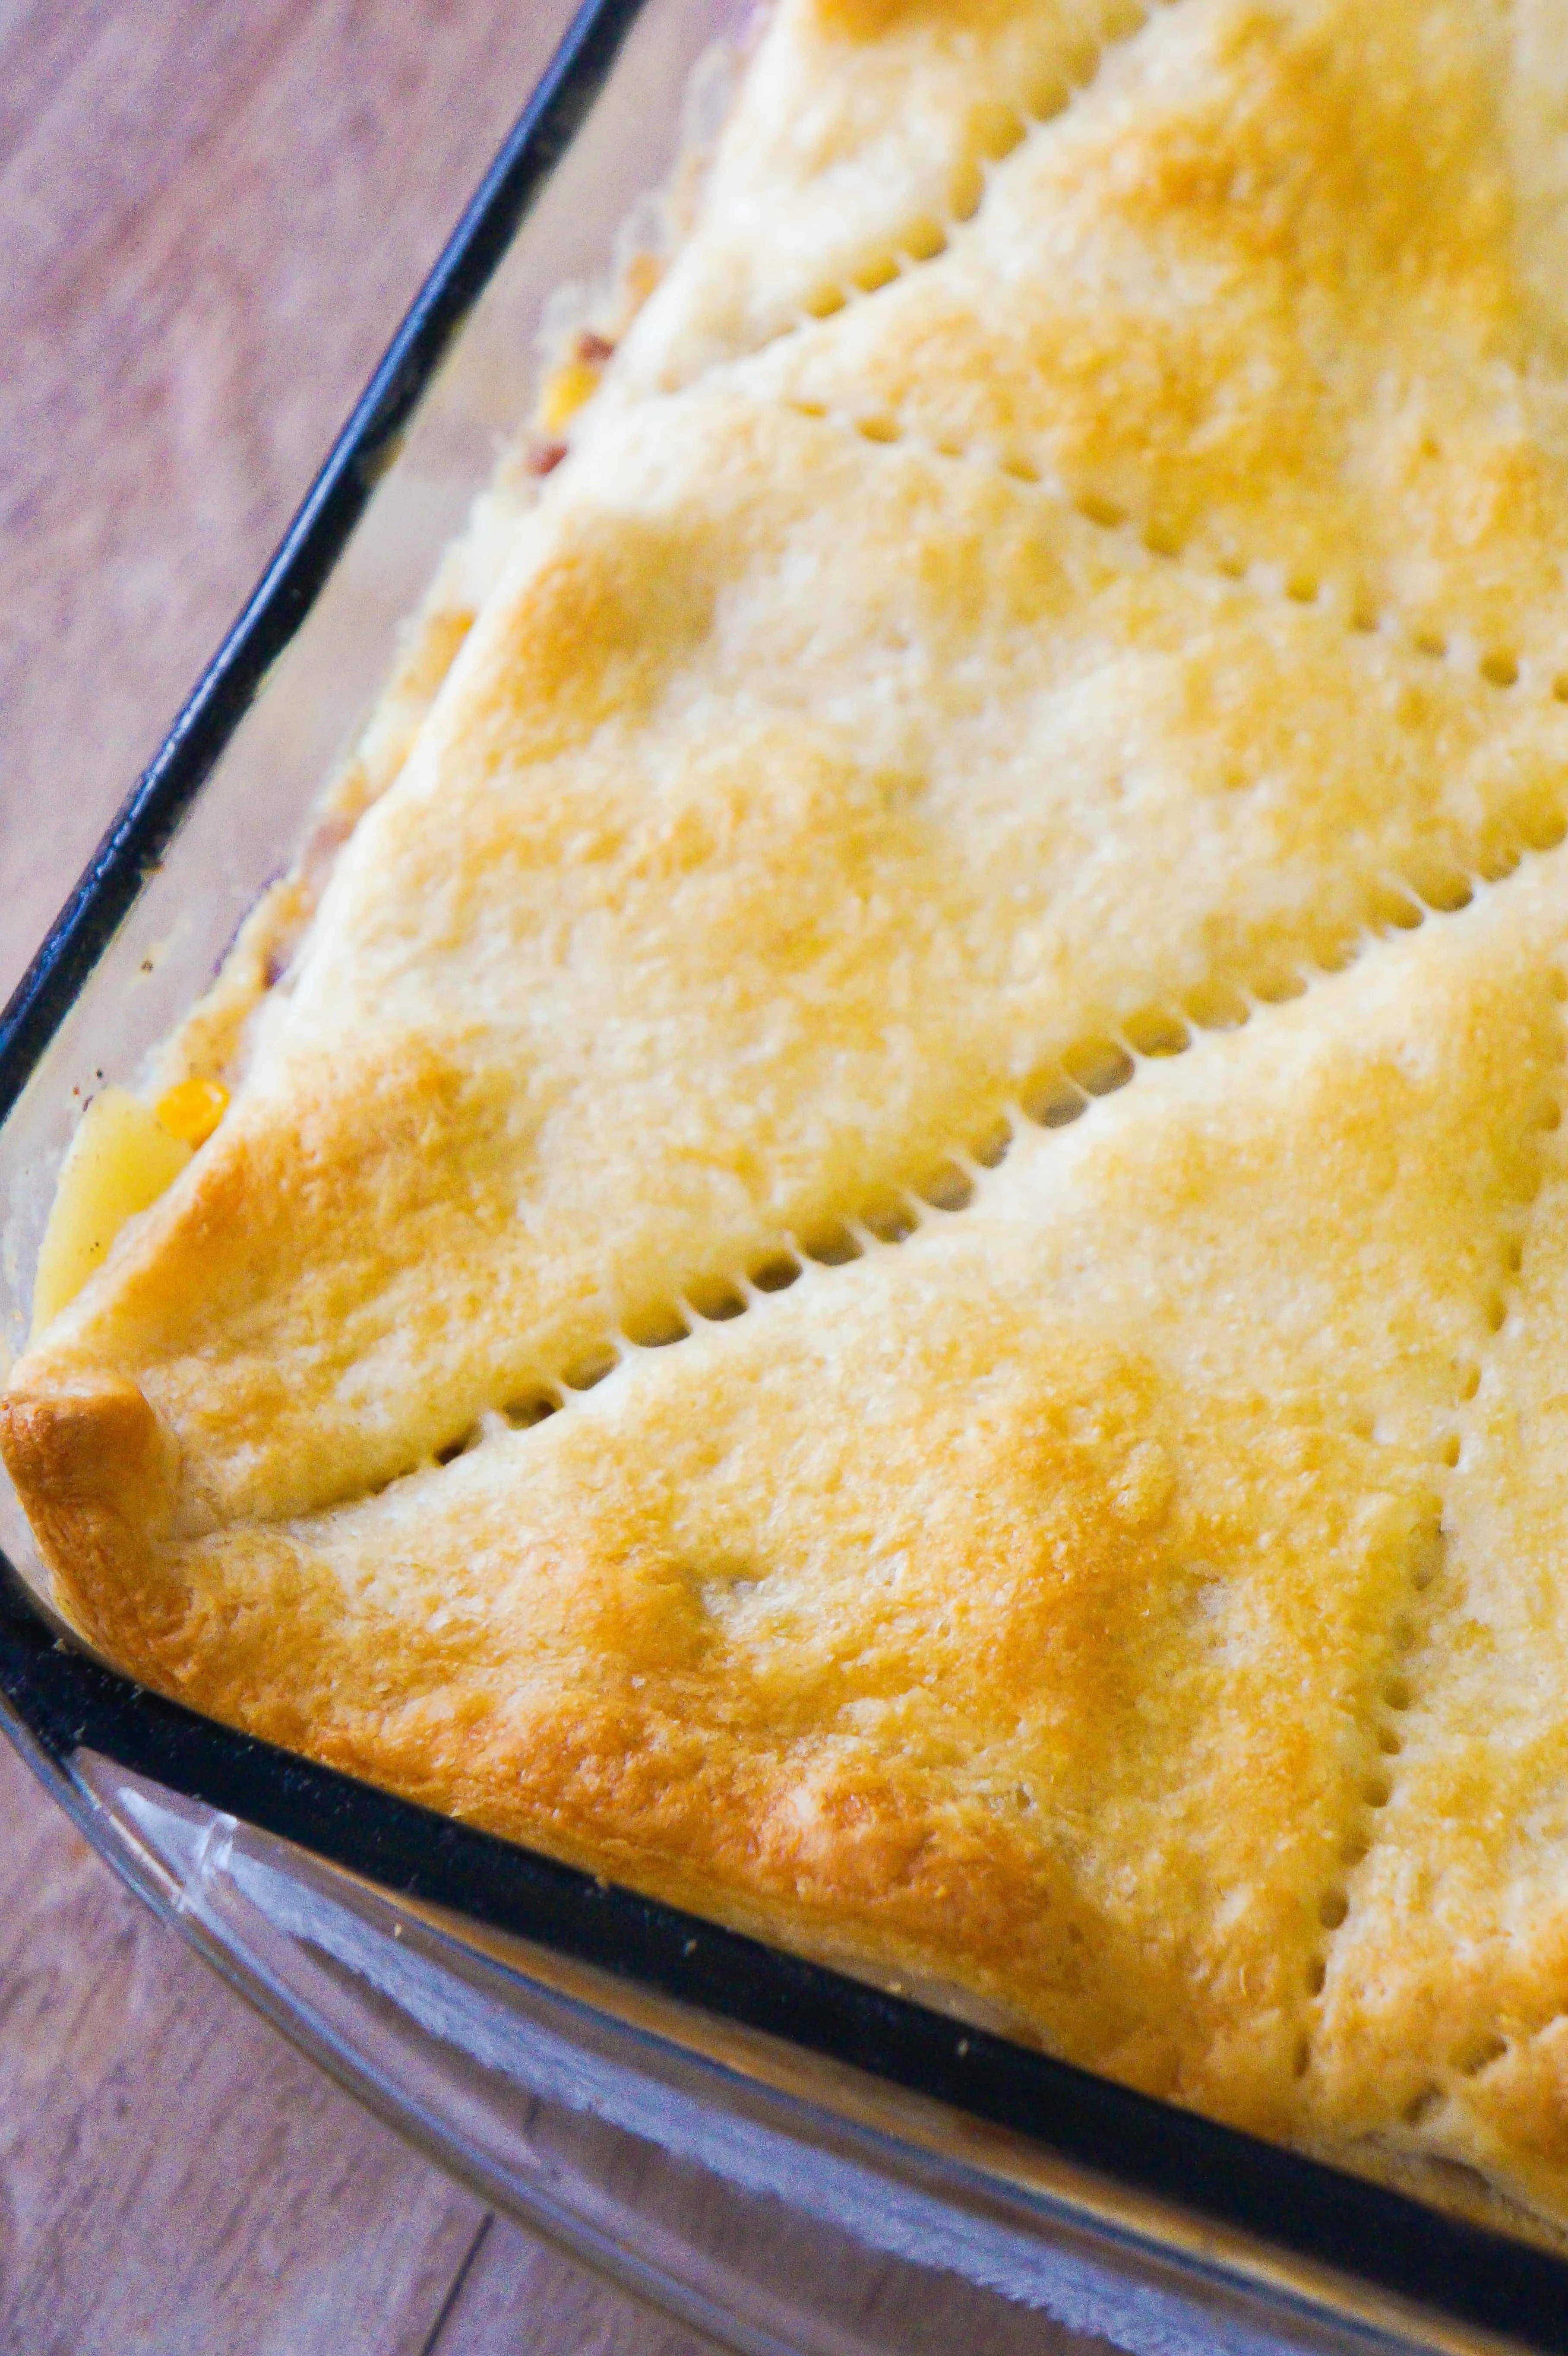 Bacon & Chicken Pot Pie Casserole is an easy dinner recipe perfect for cold weather.